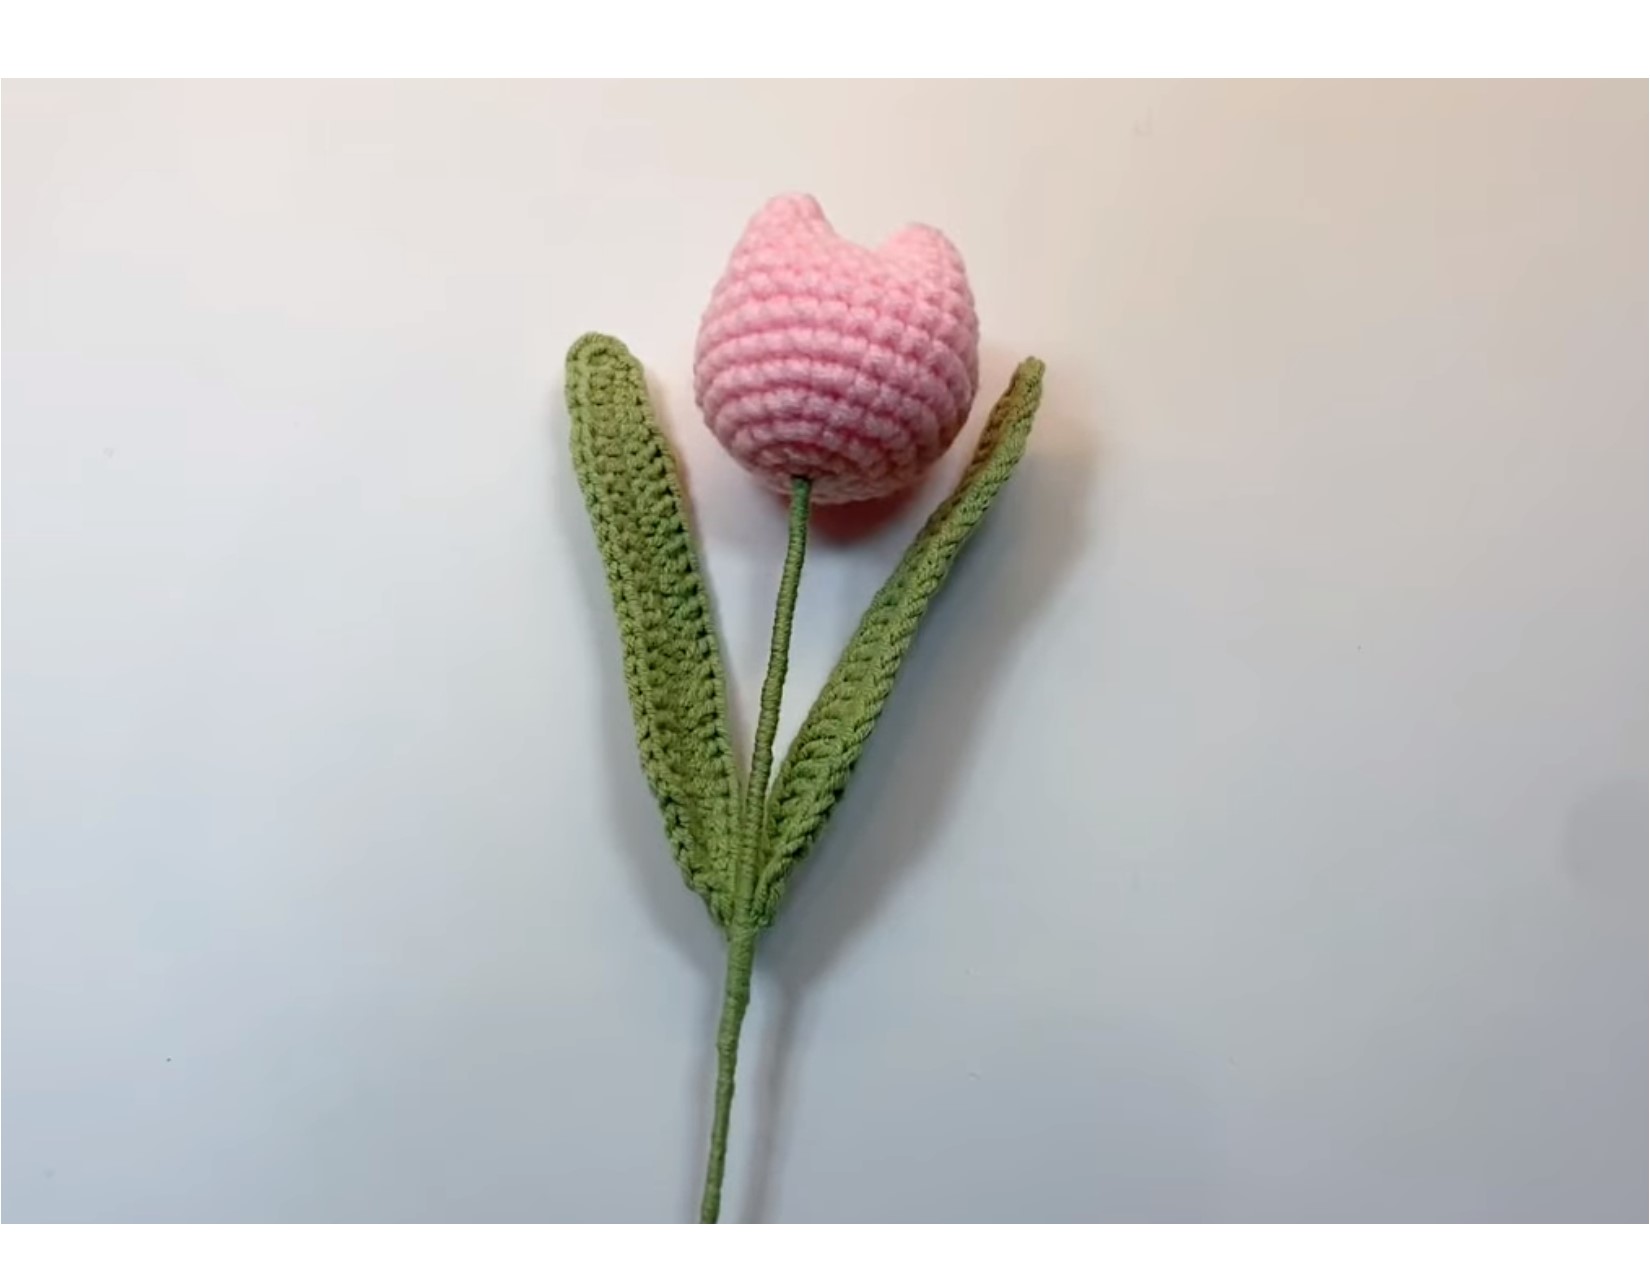 A crocheted pink tulip with green leaves and stem